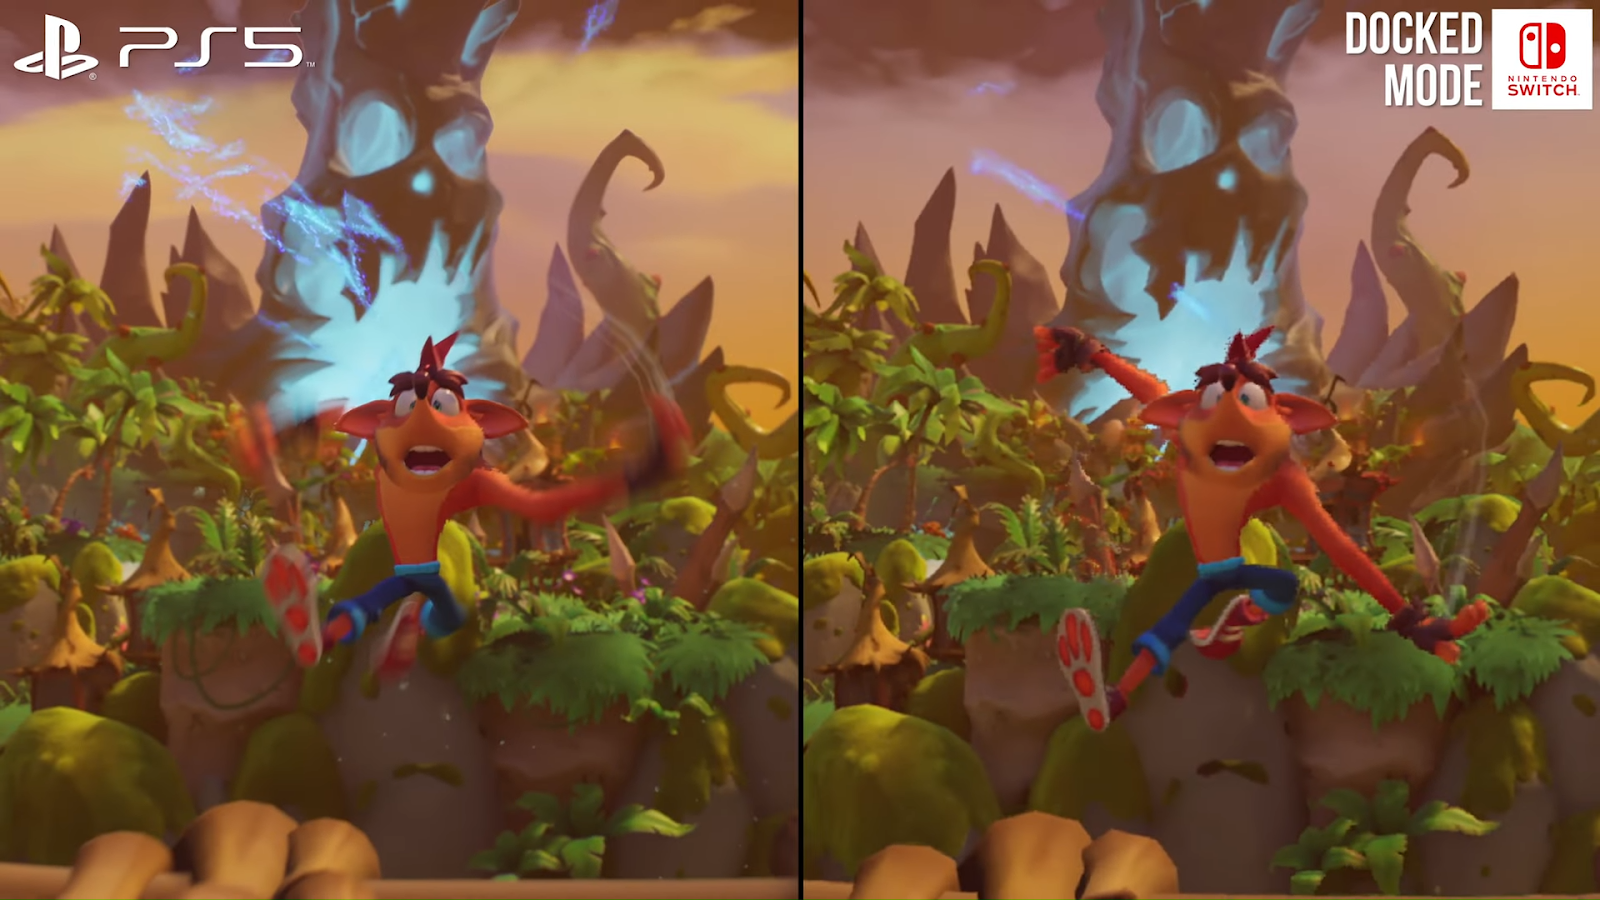 Crash Bandicoot 4 on PS5 is a must-play platformer